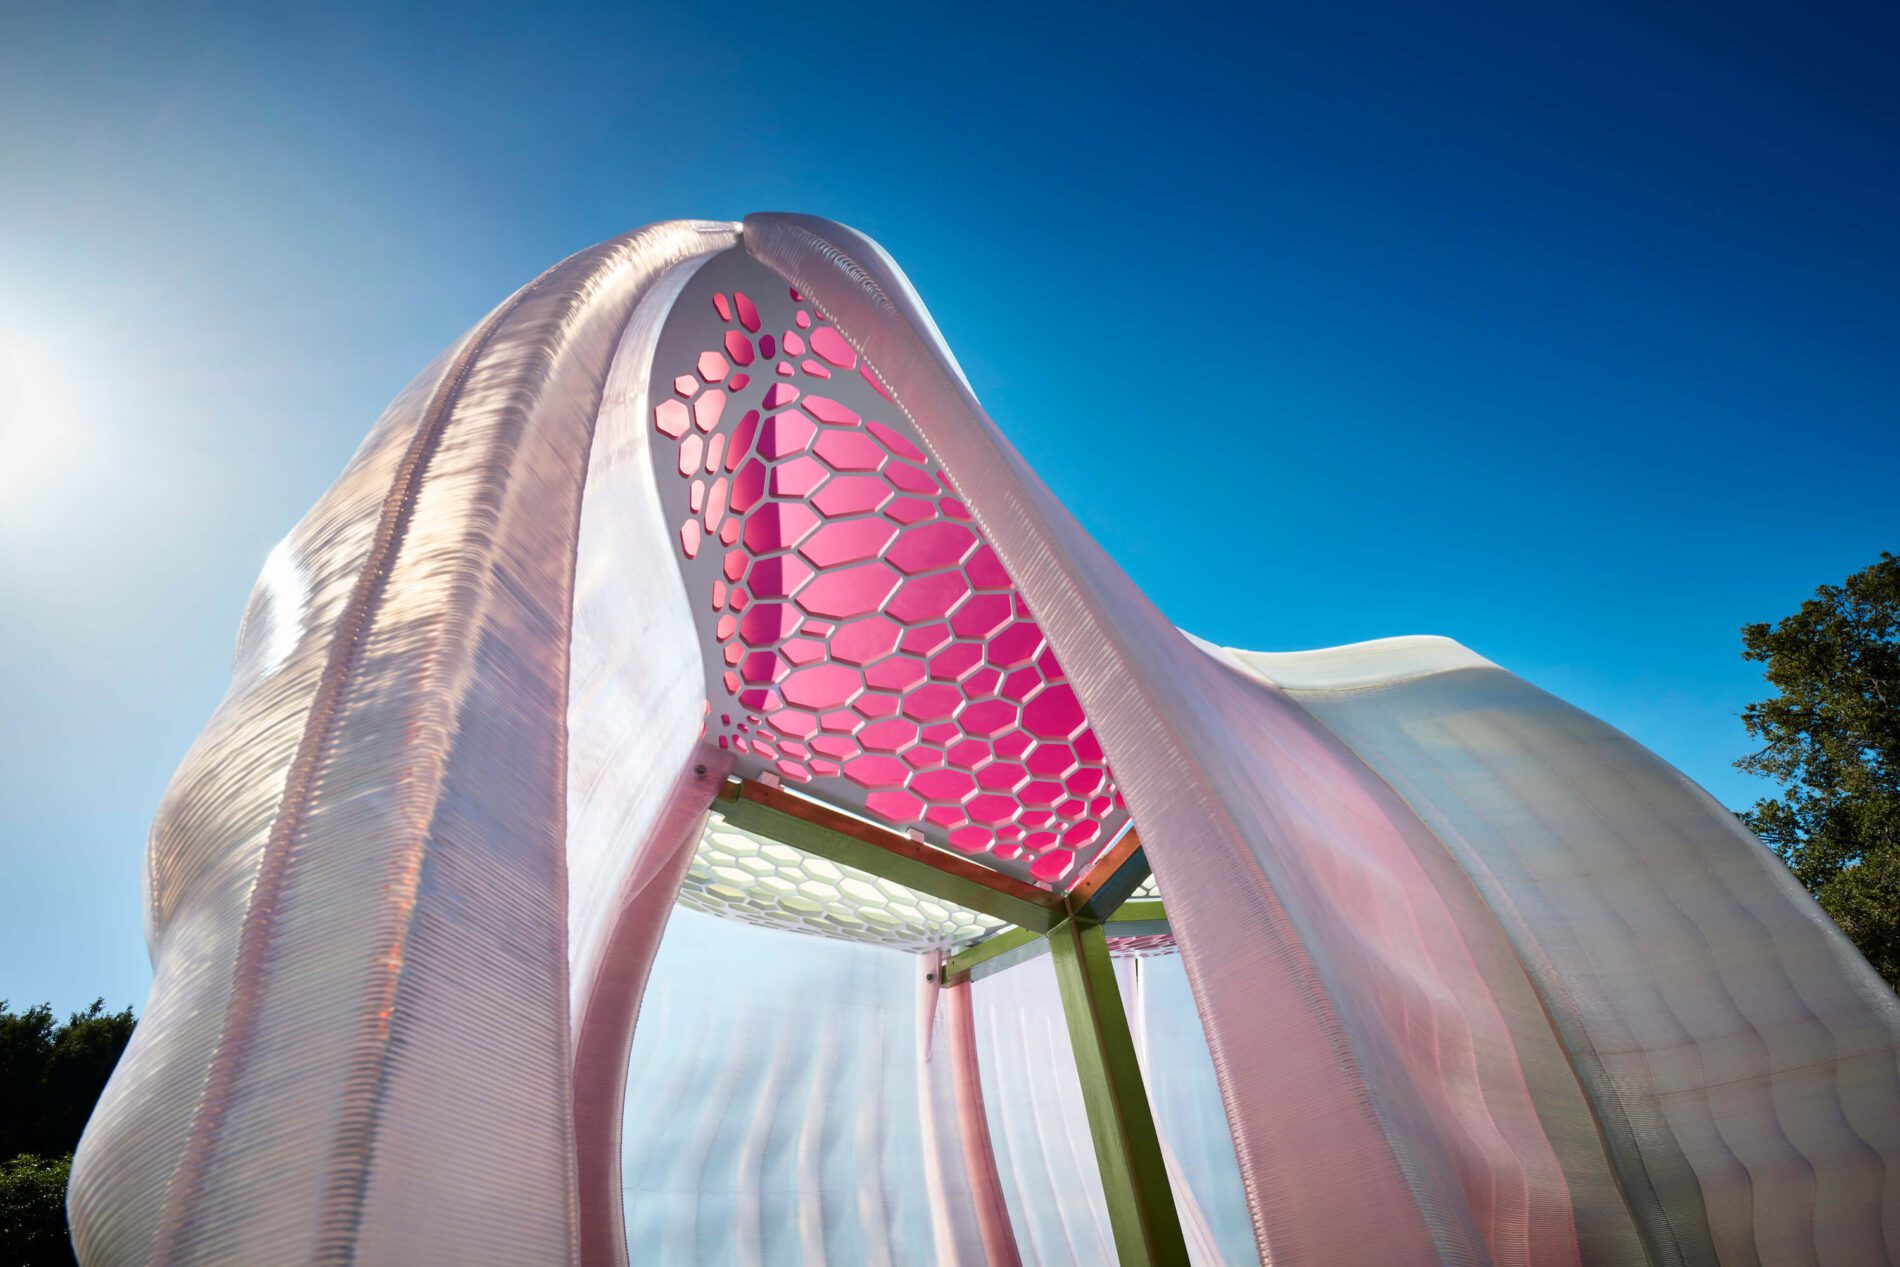 Organic pink formed structure with blue sky behind